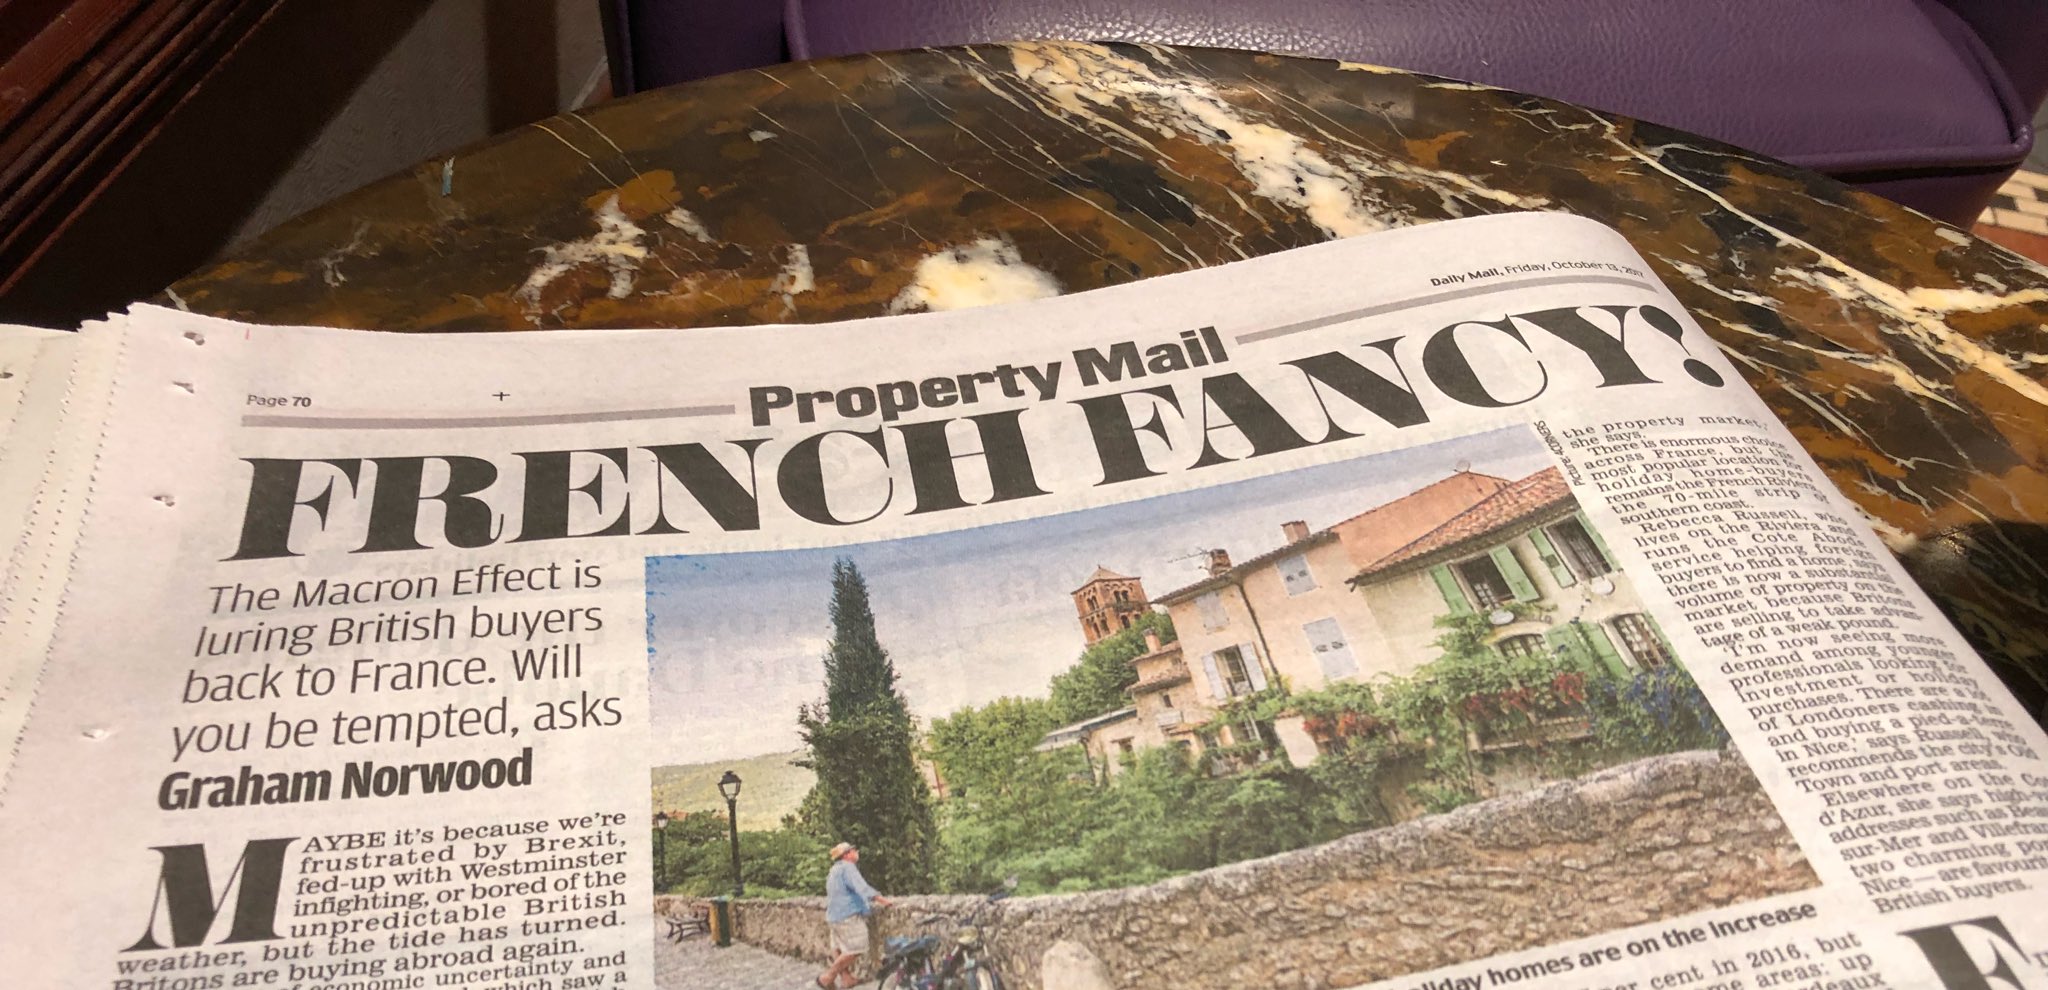 Daily Mail – How the Macron effect is luring British buyers back to French property